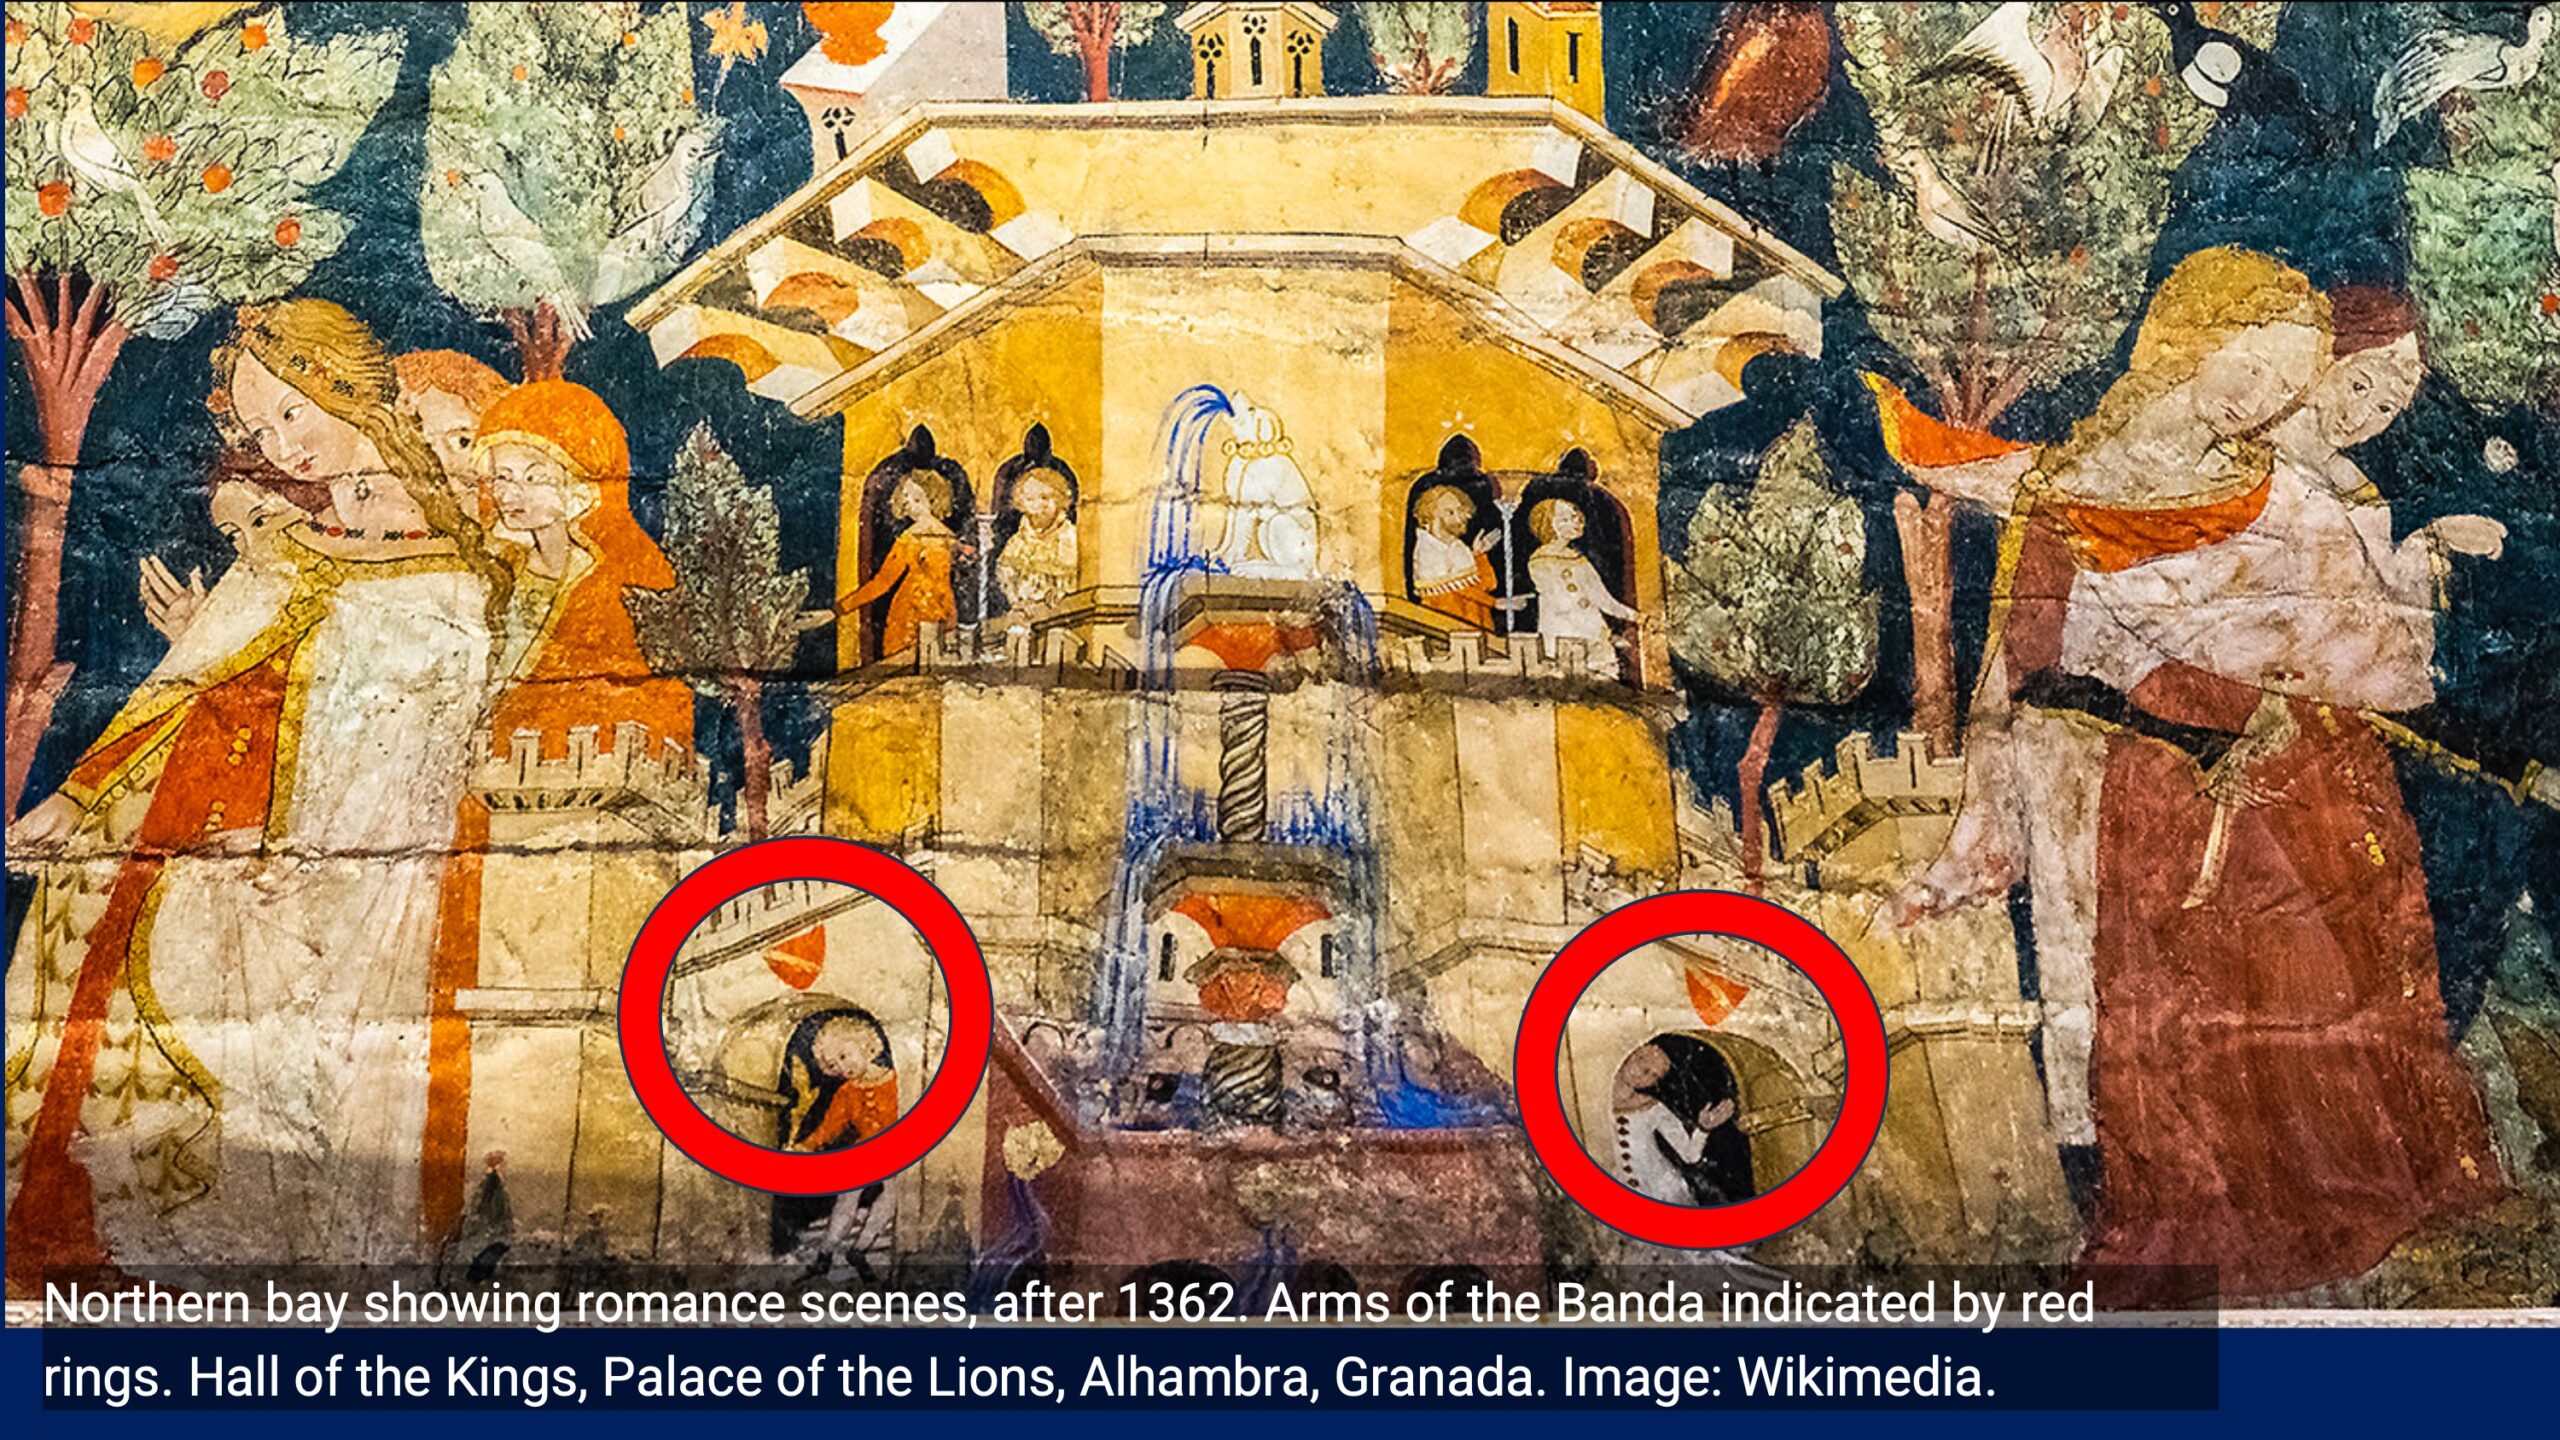 3. Northern bay showing romance scenes, after 1362. Arms of the Banda indicated by red rings. Hall of the Kings, Palace of the Lions, Alhambra, Granada. Image: Wikimedia.